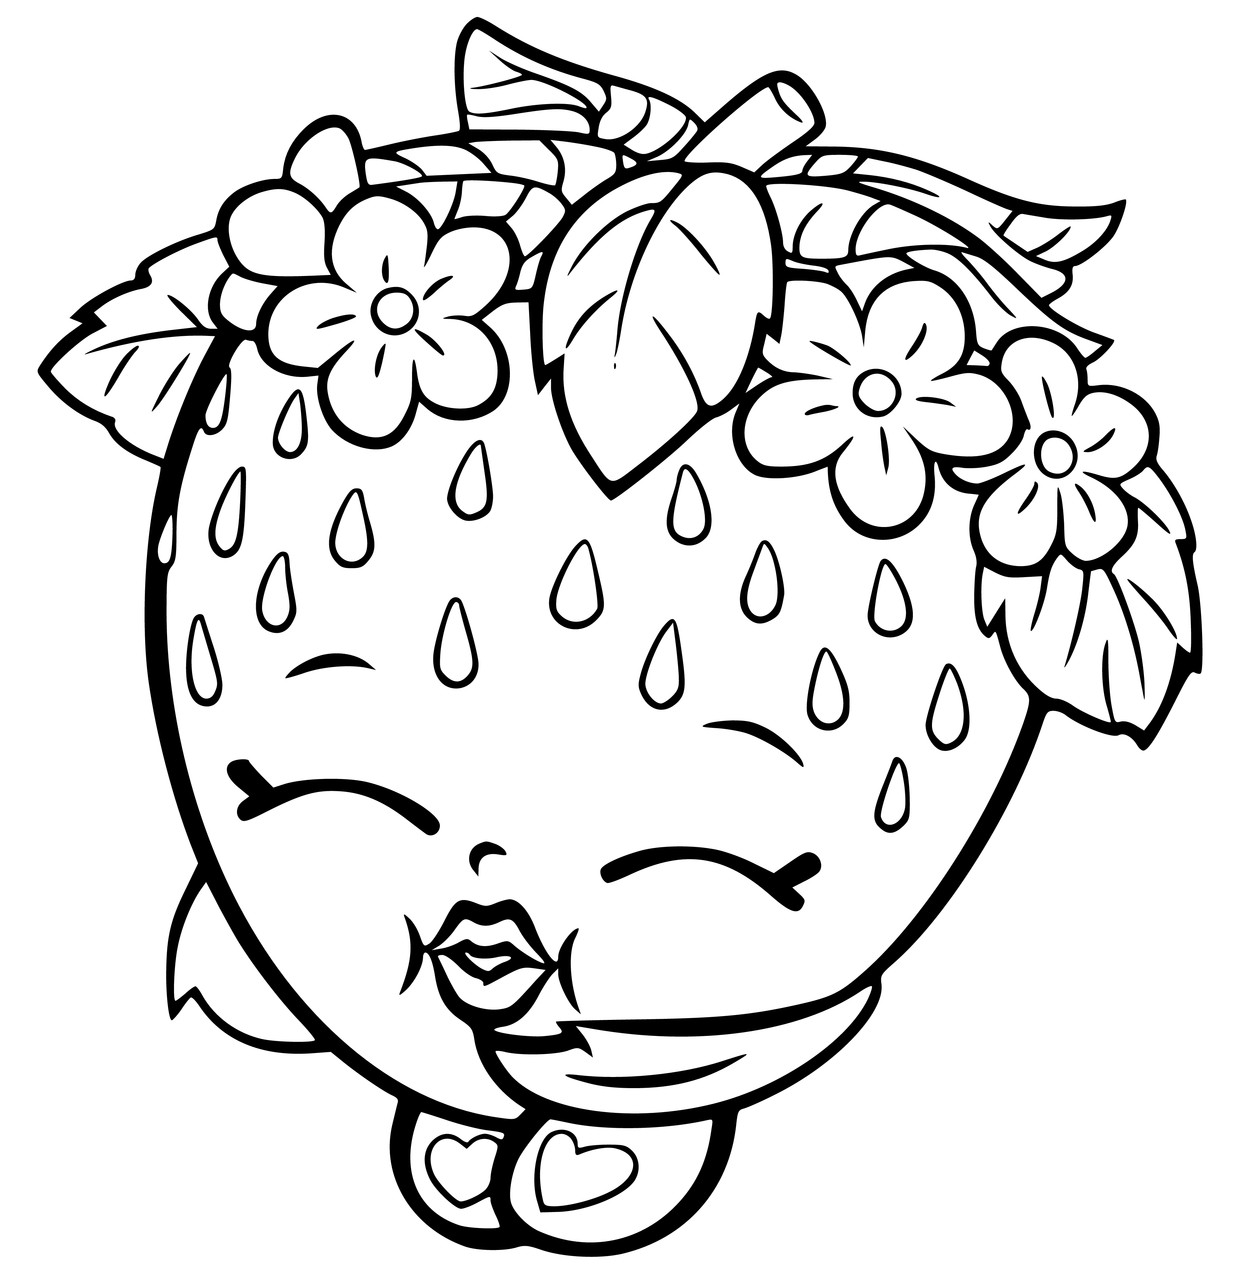 Coloring Pages For Kids Shopkins
 Shopkins Coloring Pages Best Coloring Pages For Kids